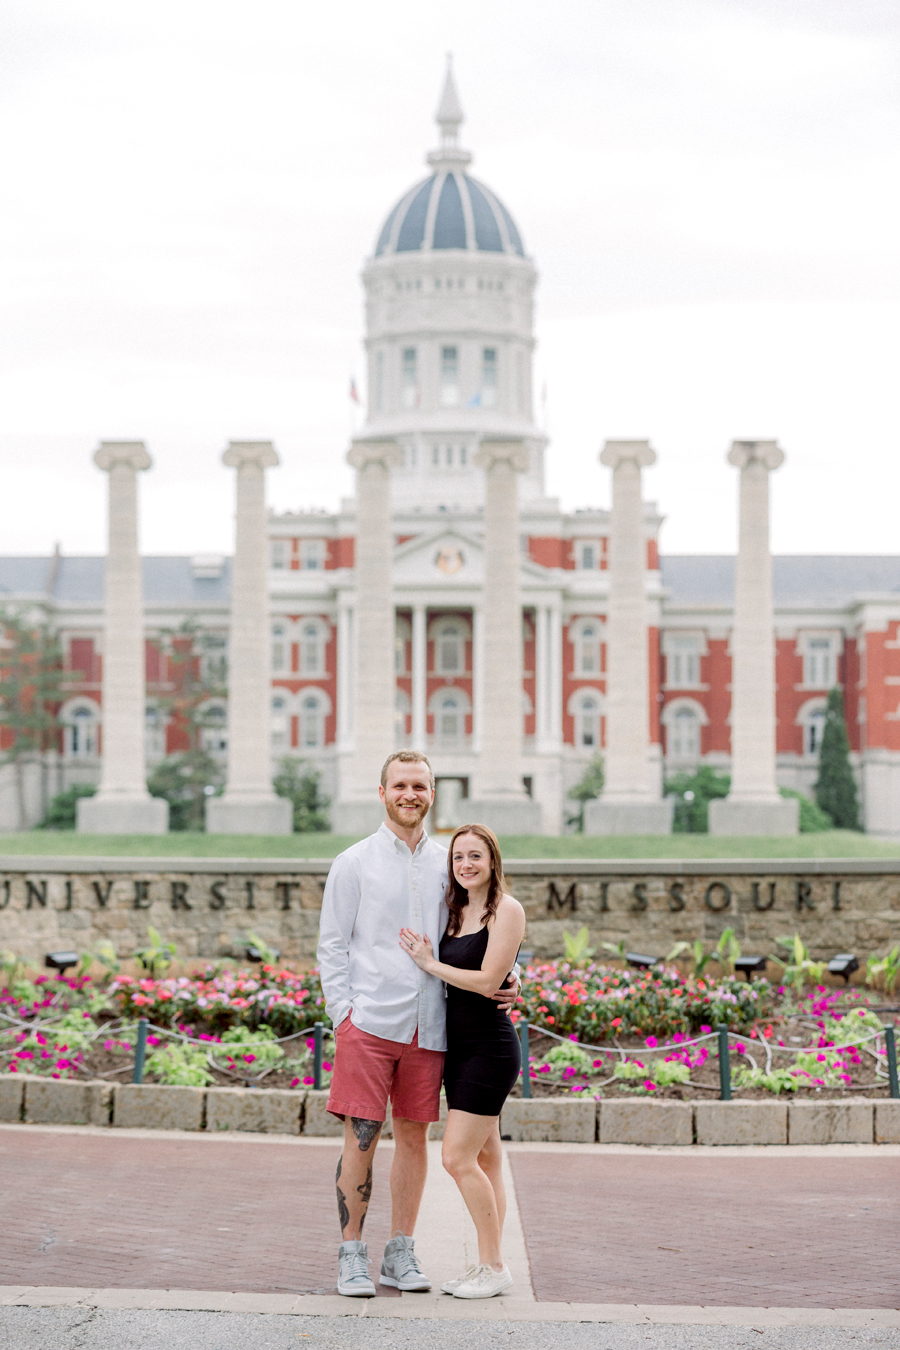 A couple poses for their engagement photos in front of the Quad at Mizzou.